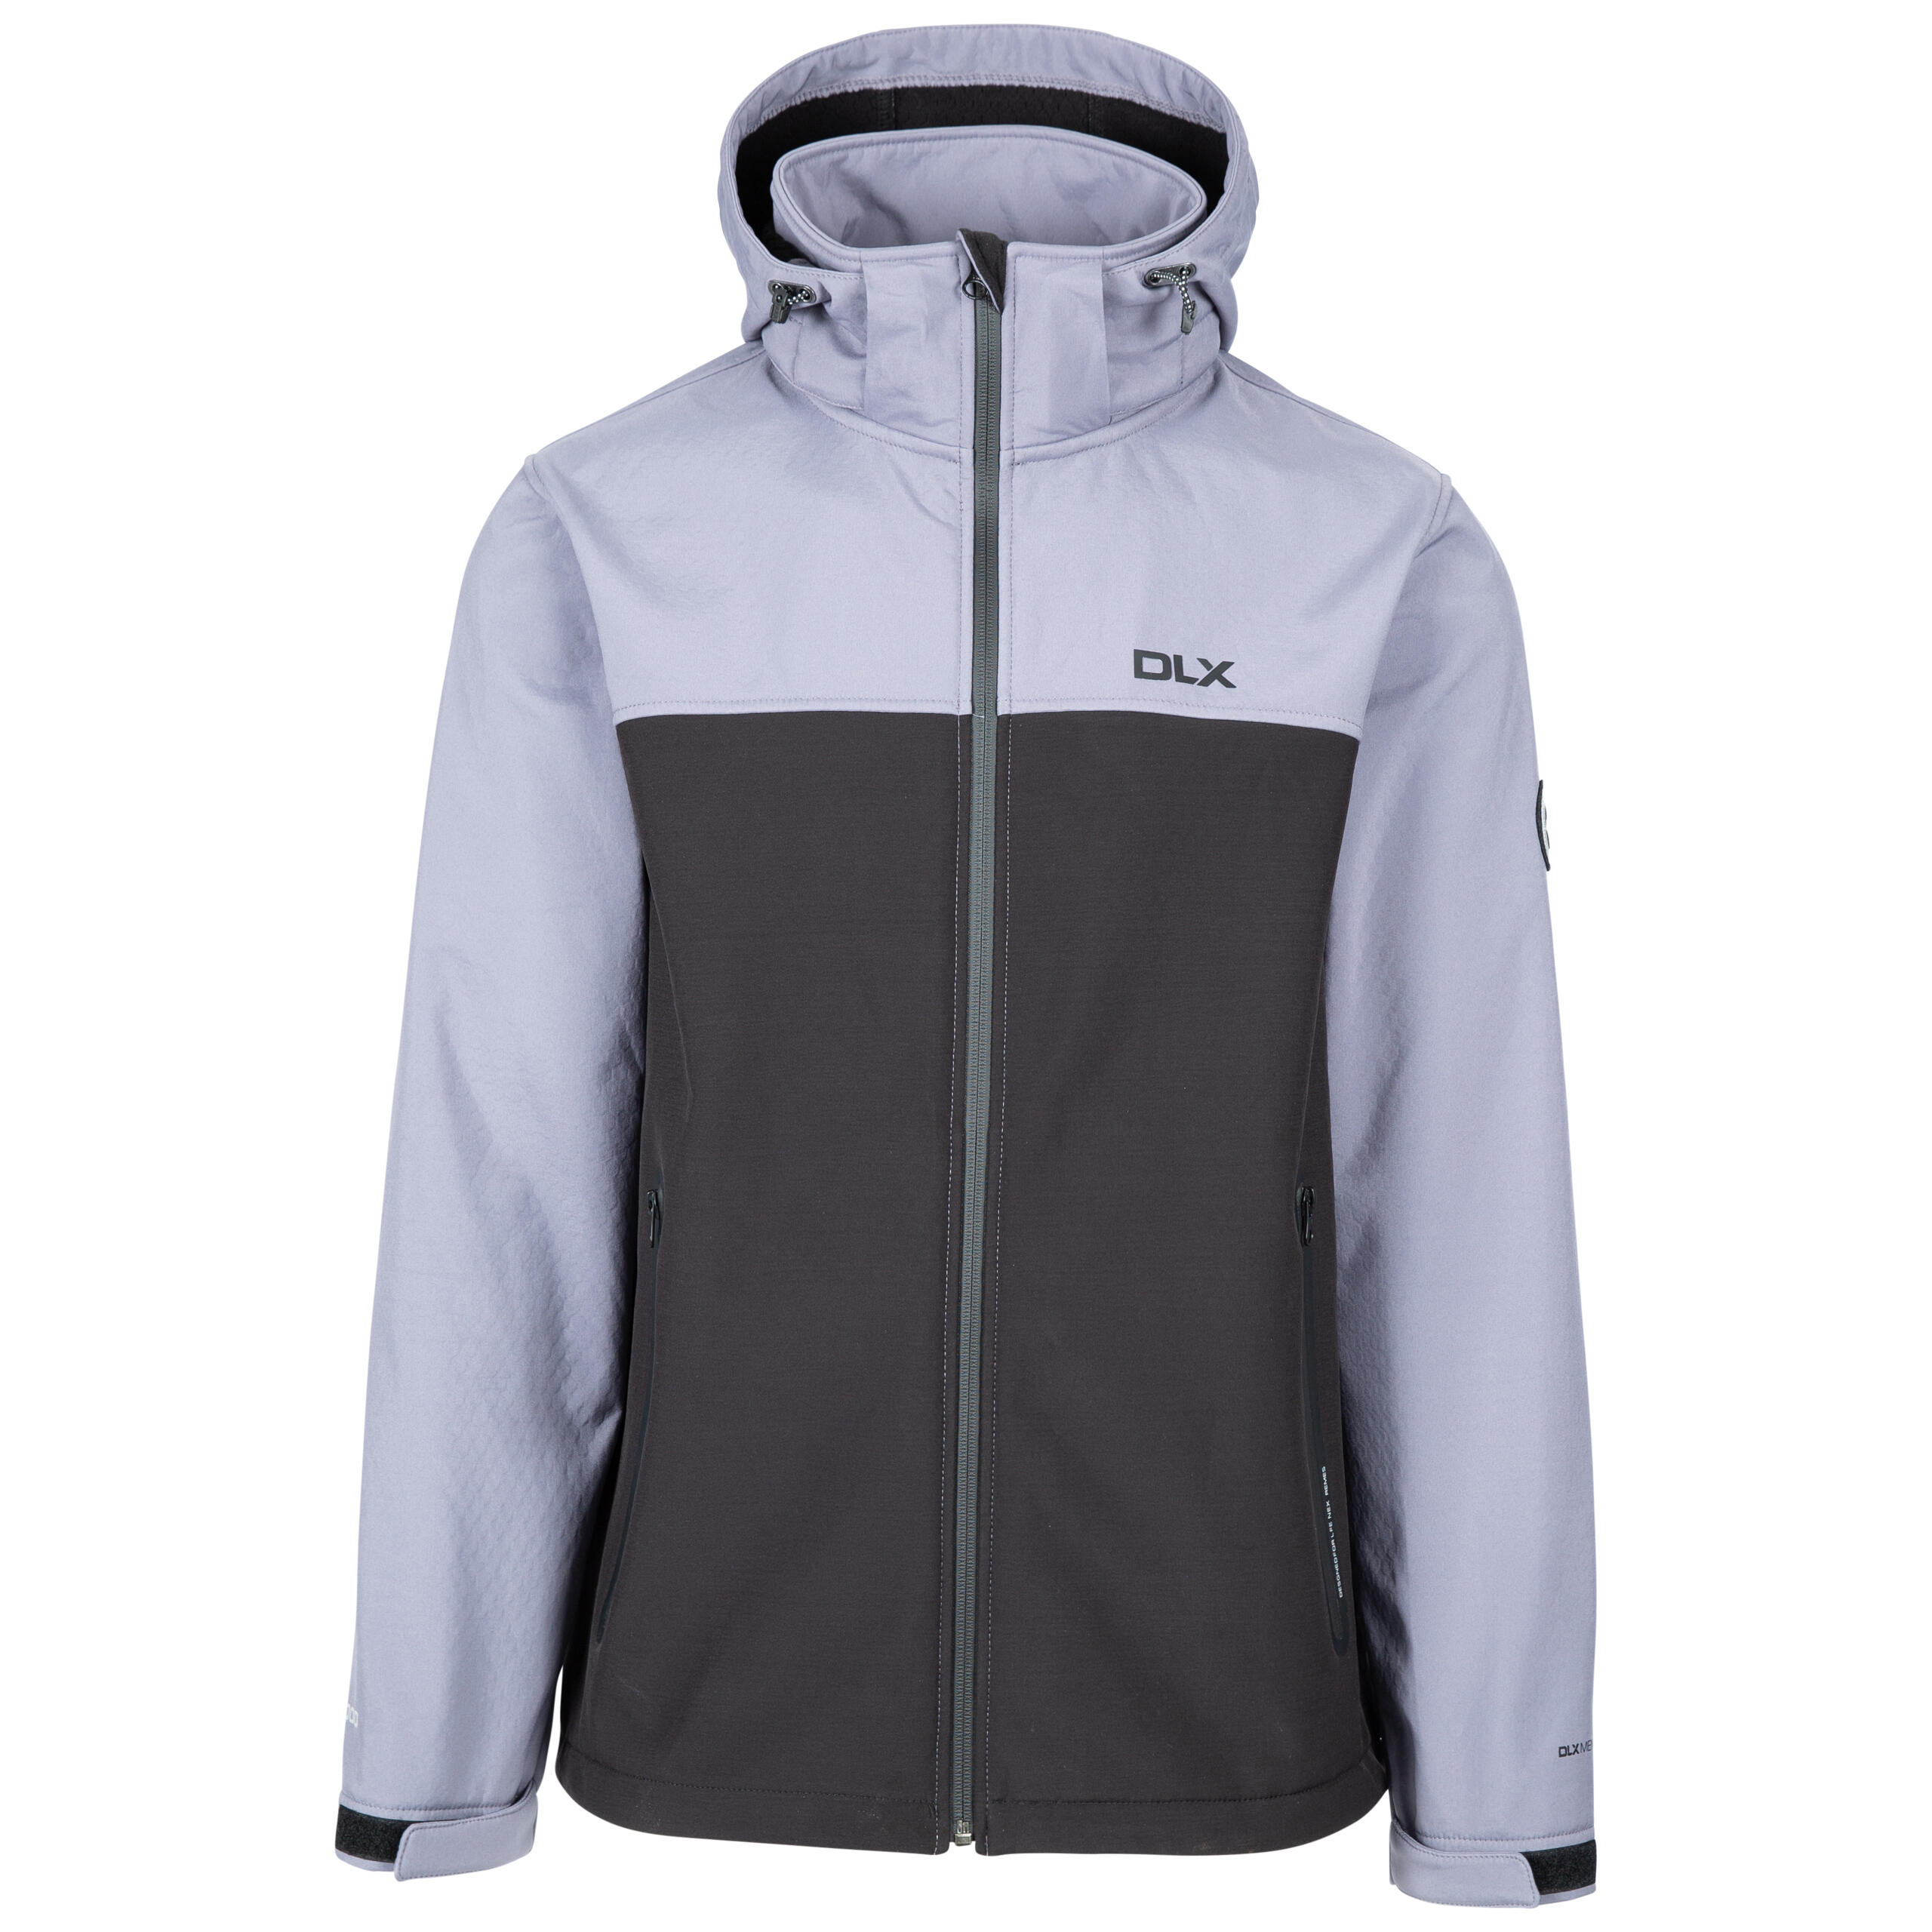 DLX DLX Mens Softshell Jacket Zip Off Hood Made with Recycled Materials Moyler